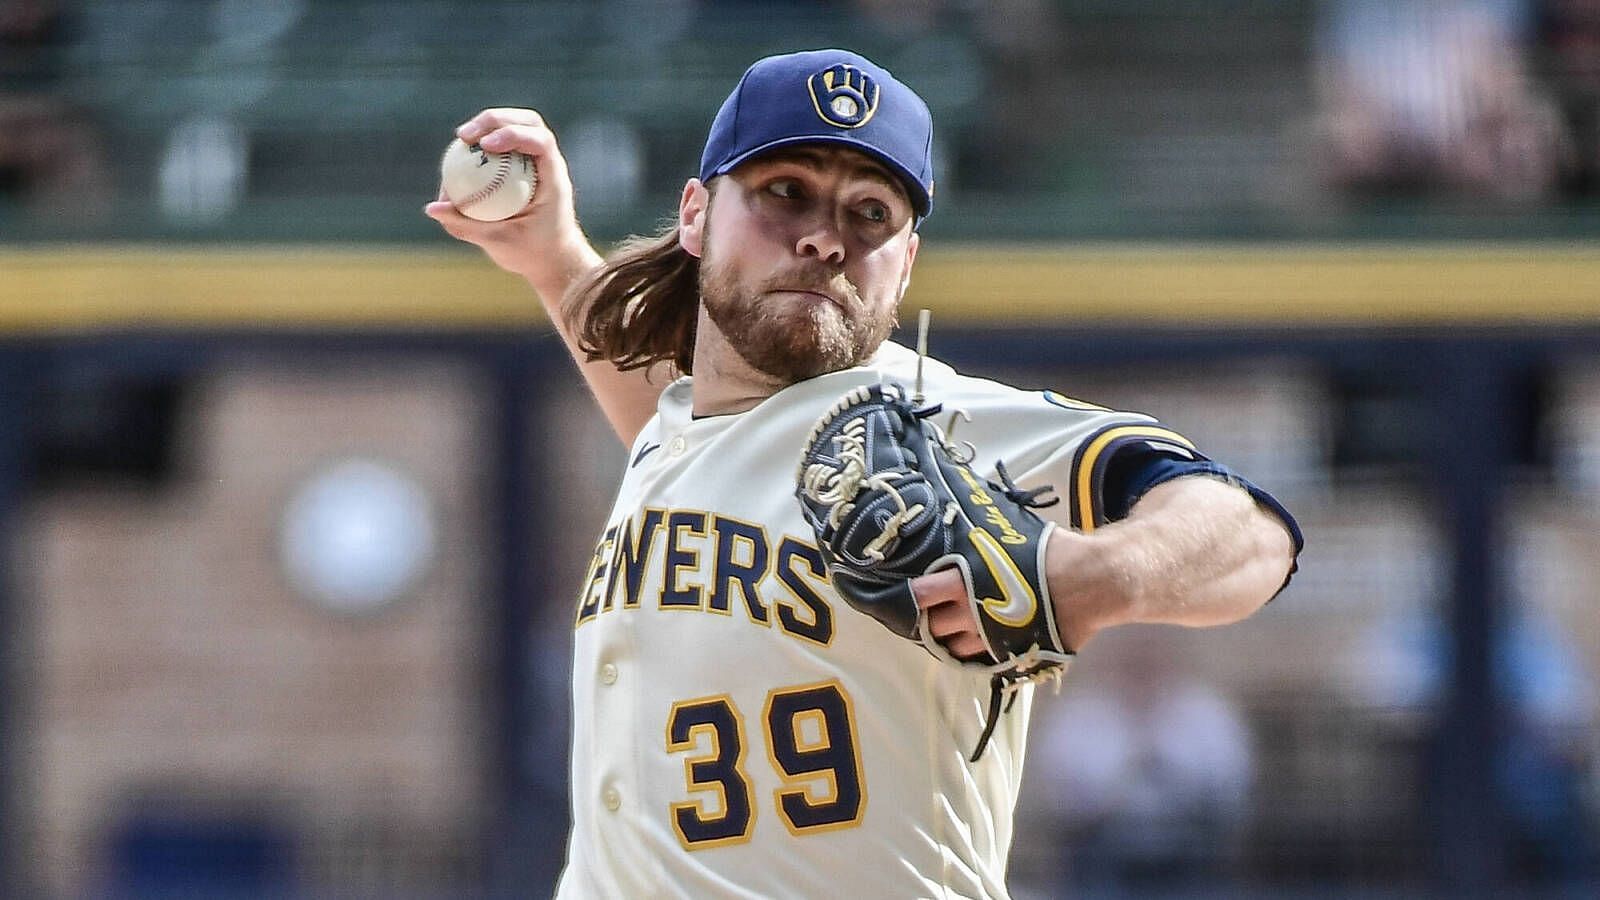 College baseball season preview: Top pitchers to watch in 2022 | NCAA.com